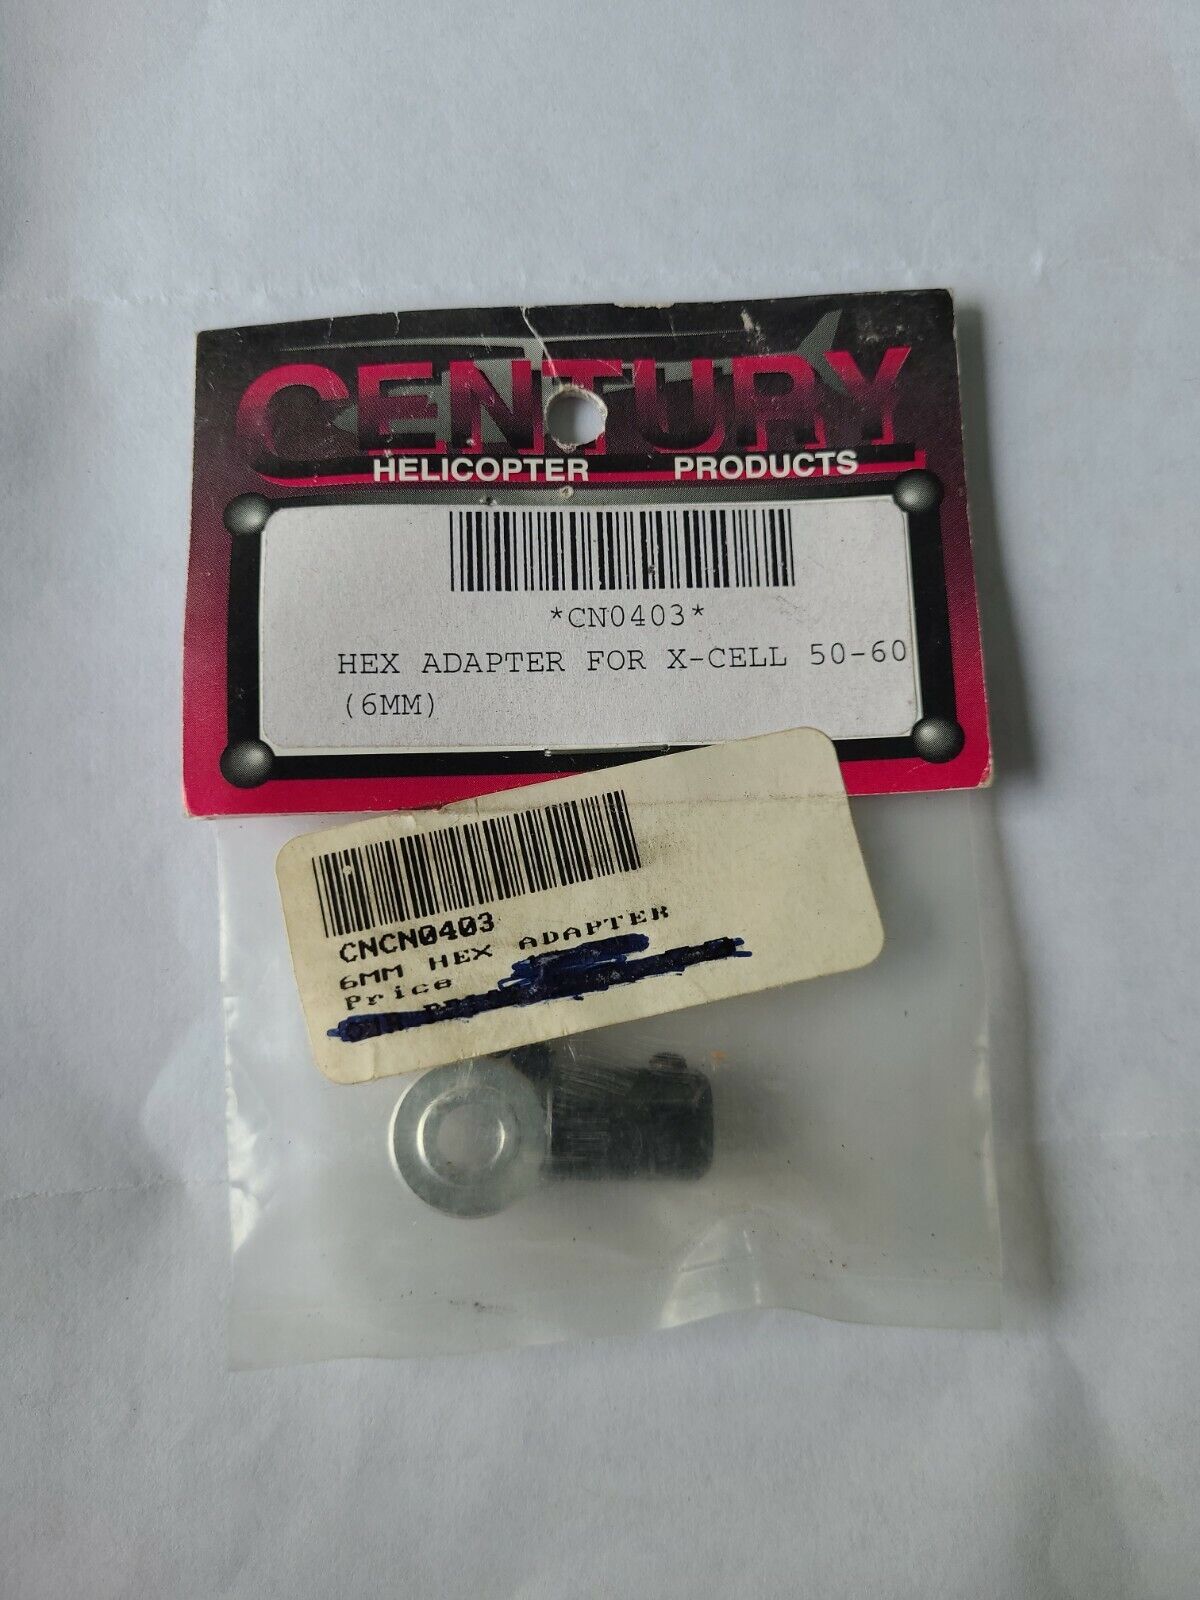 CN0403 Century Helicopter Hex adapter for x-cell 50-60 (6mm)